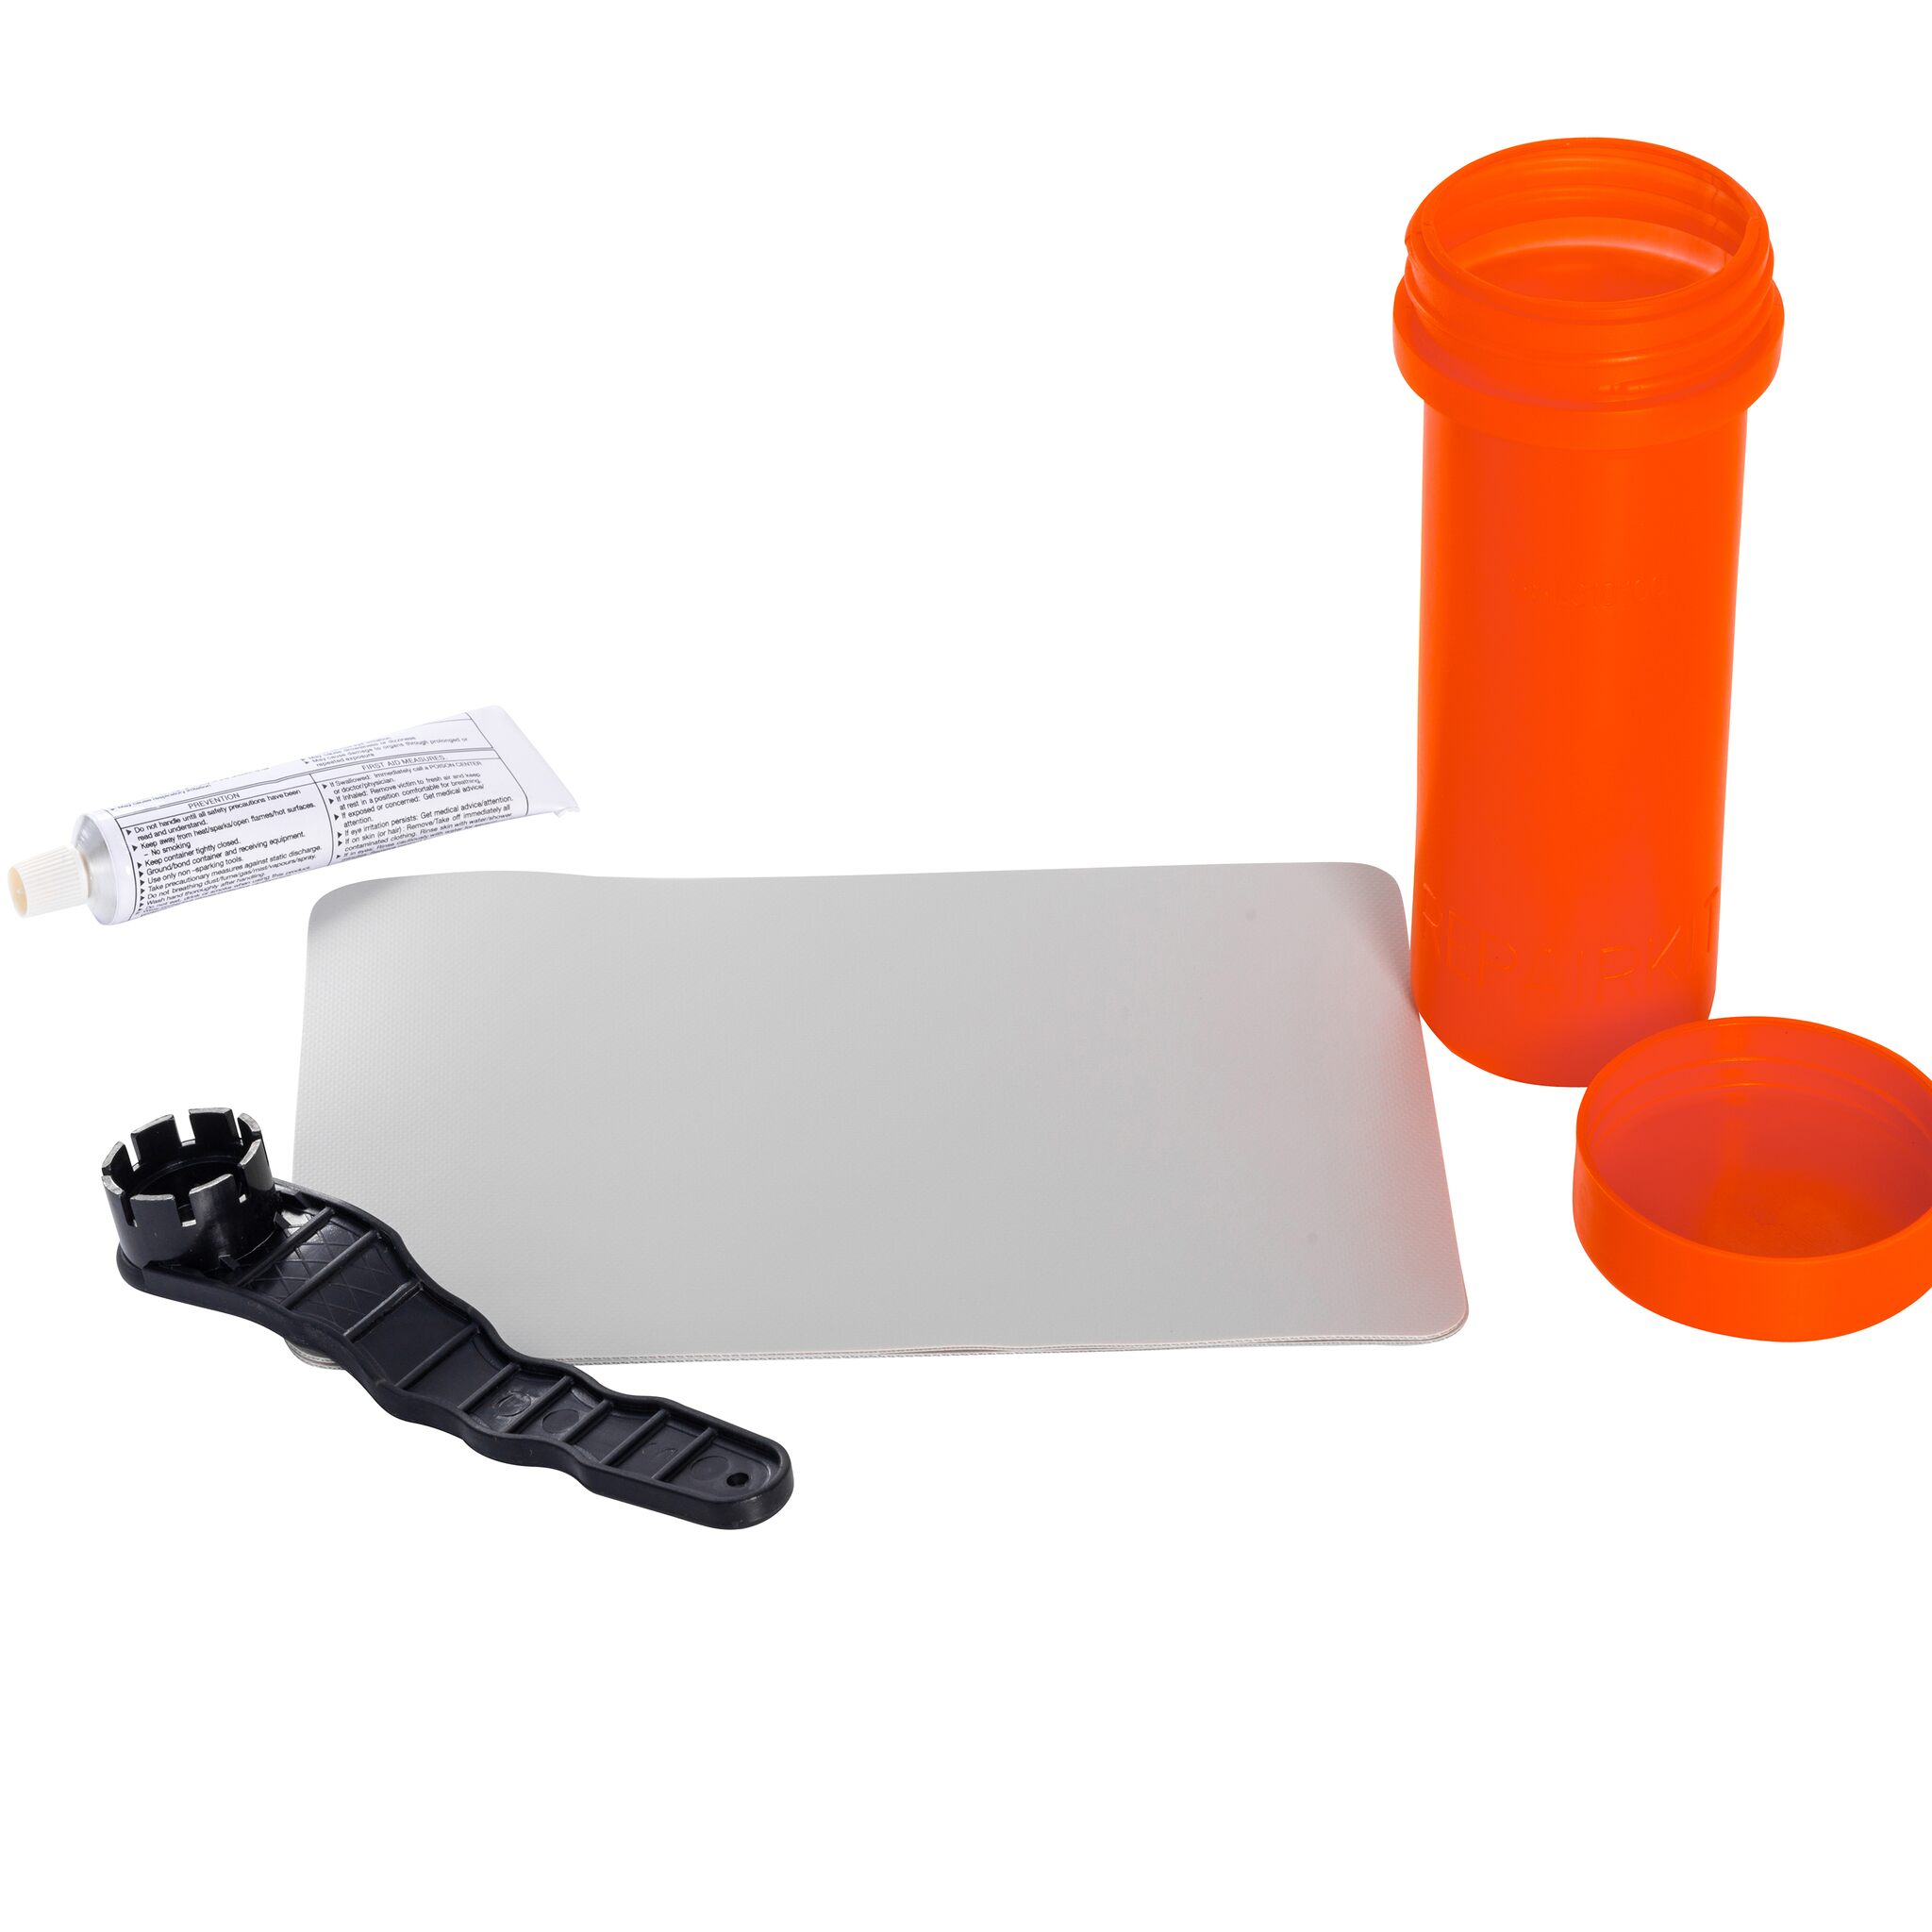 Repair kit for inflatable boats